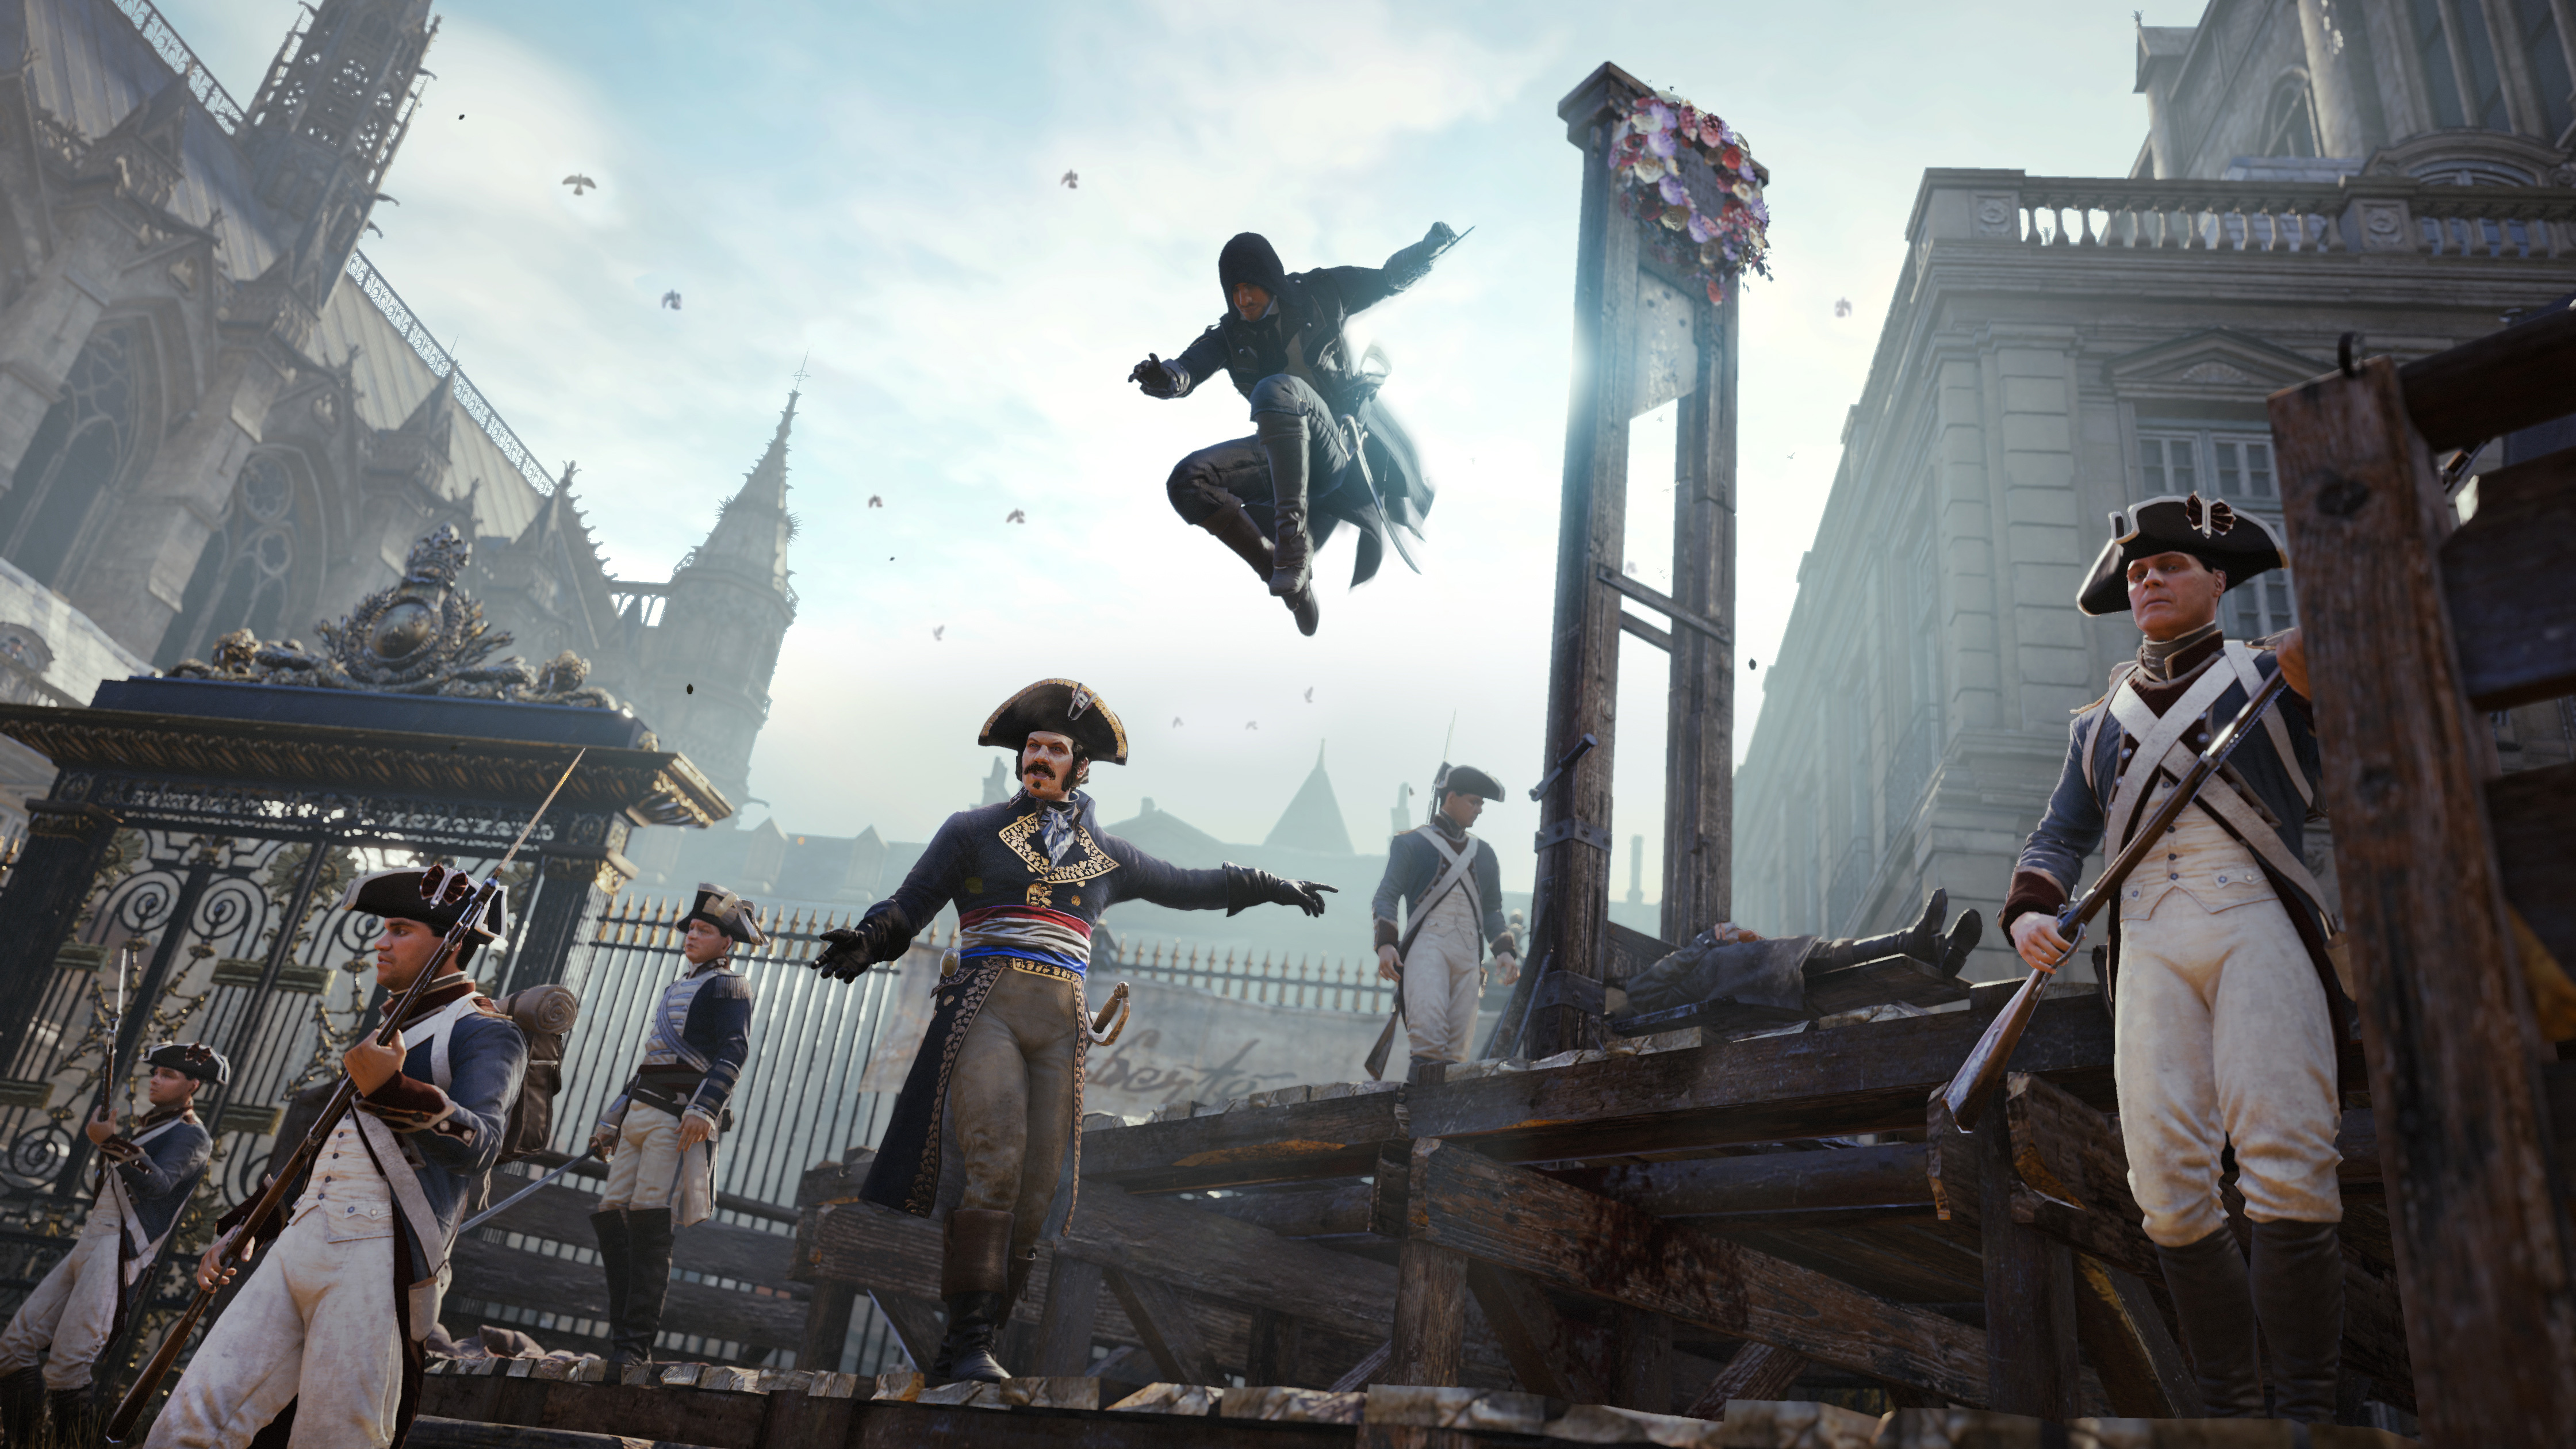 video game, assassin's creed: unity, arno dorian, assassin's creed Image for desktop